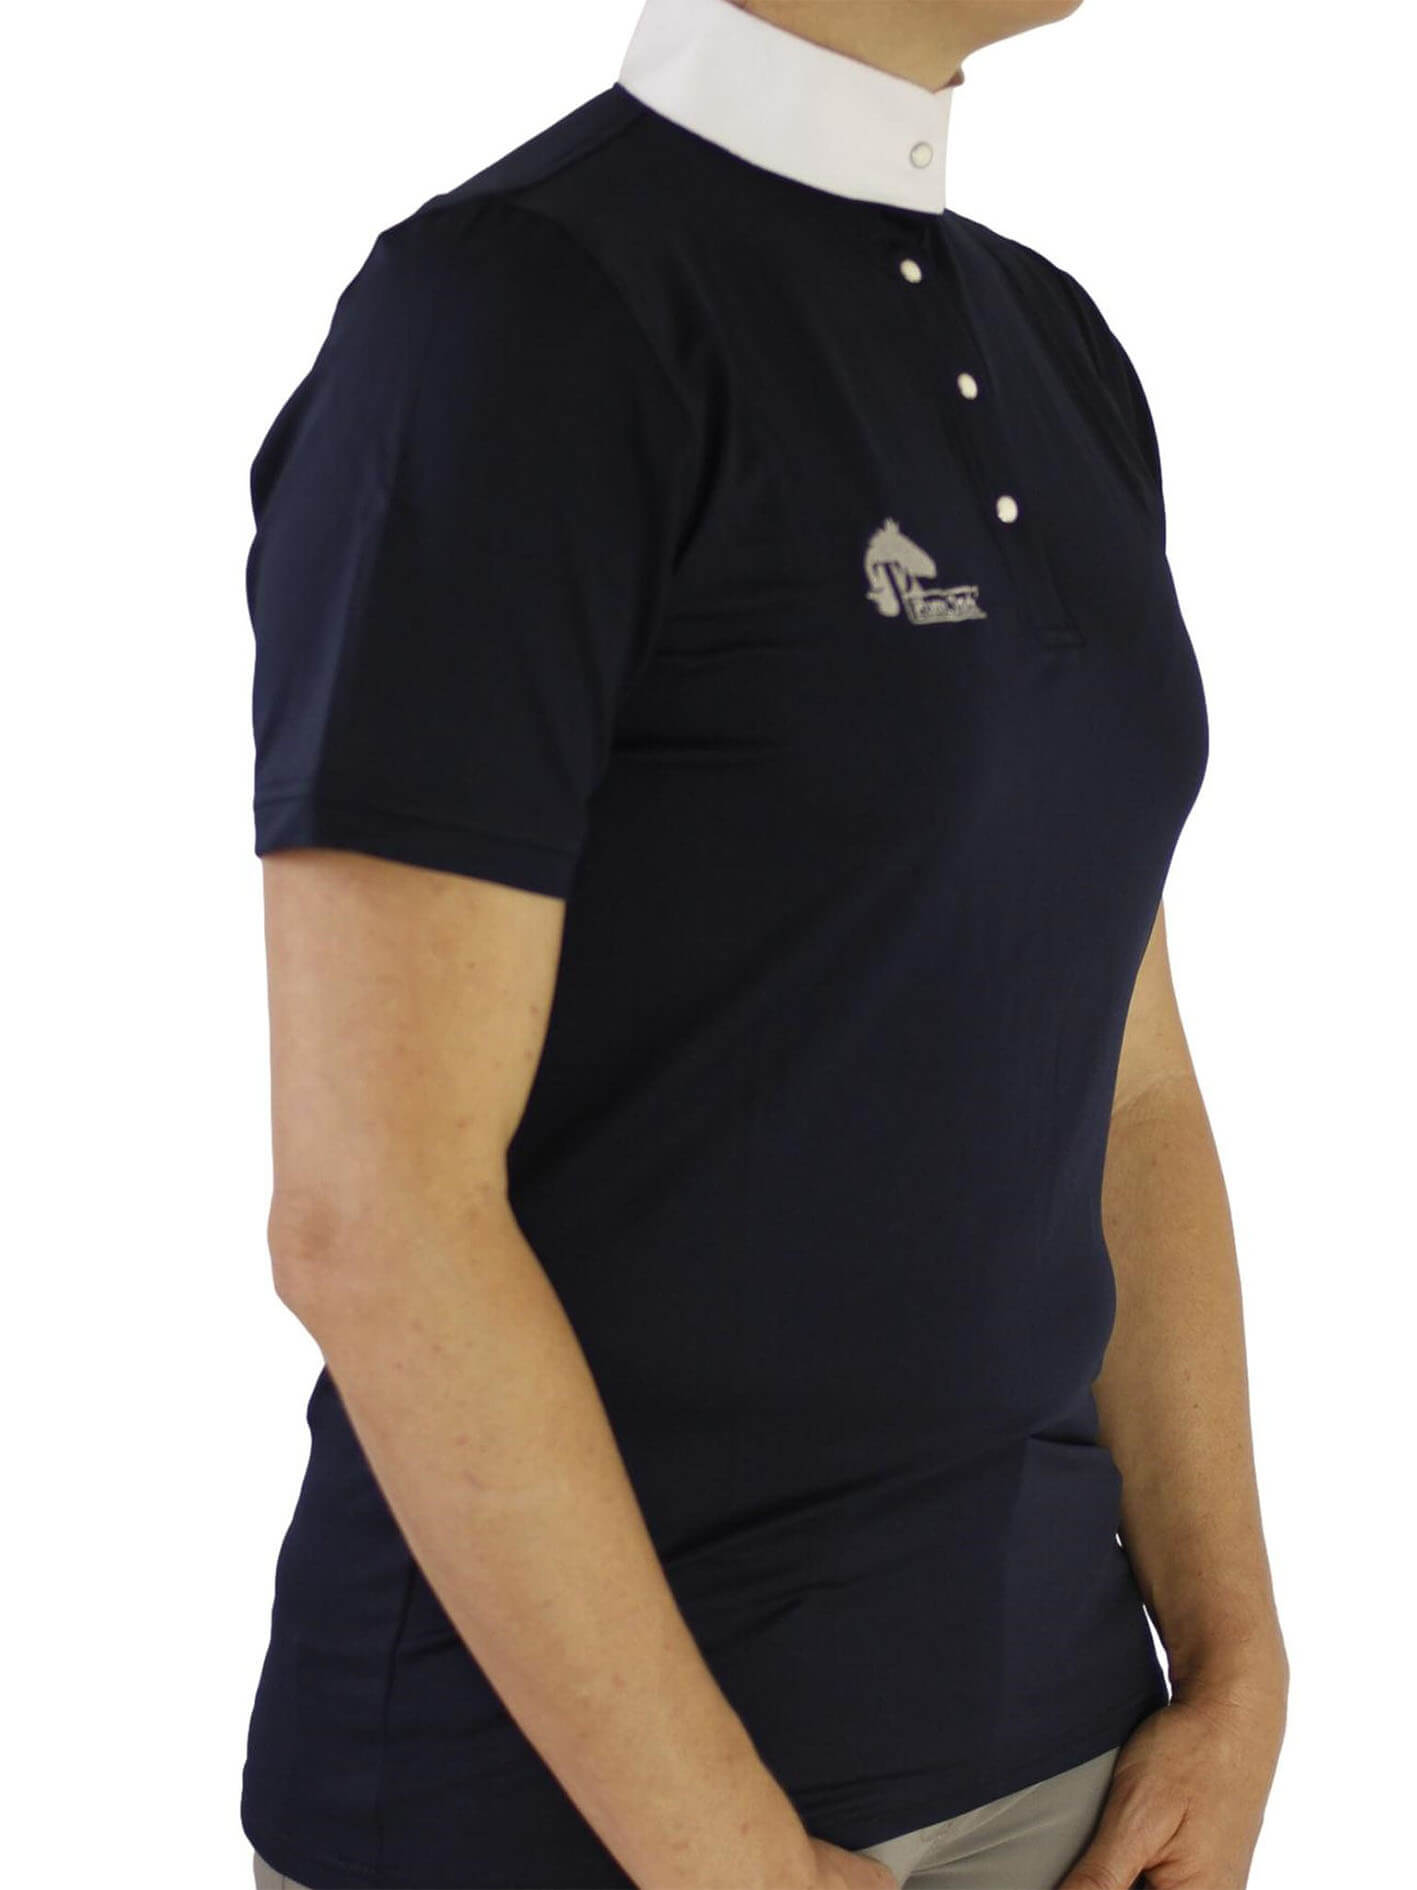 Ladies cool show shirt - Navy & white-Plum Tack-The Equestrian